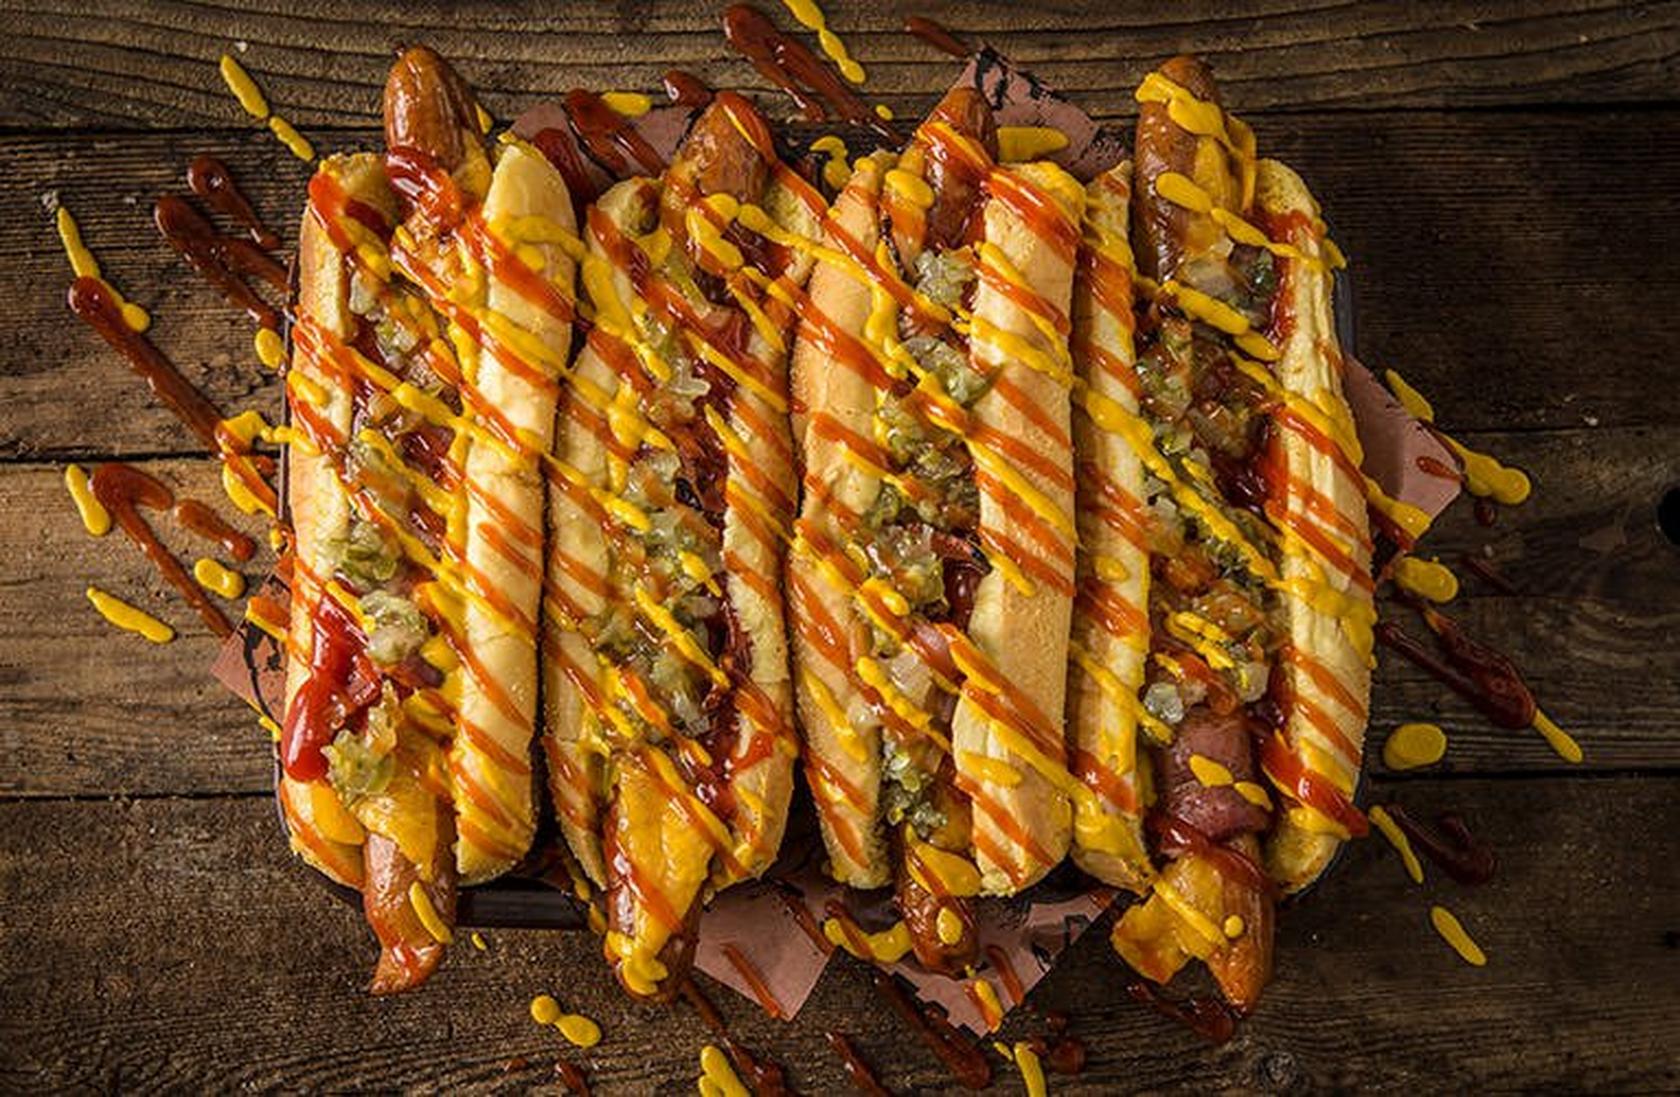 20190116_Top-Superbowl-Recipes-Bacon-Wrapped-Hot-Dogs_BG